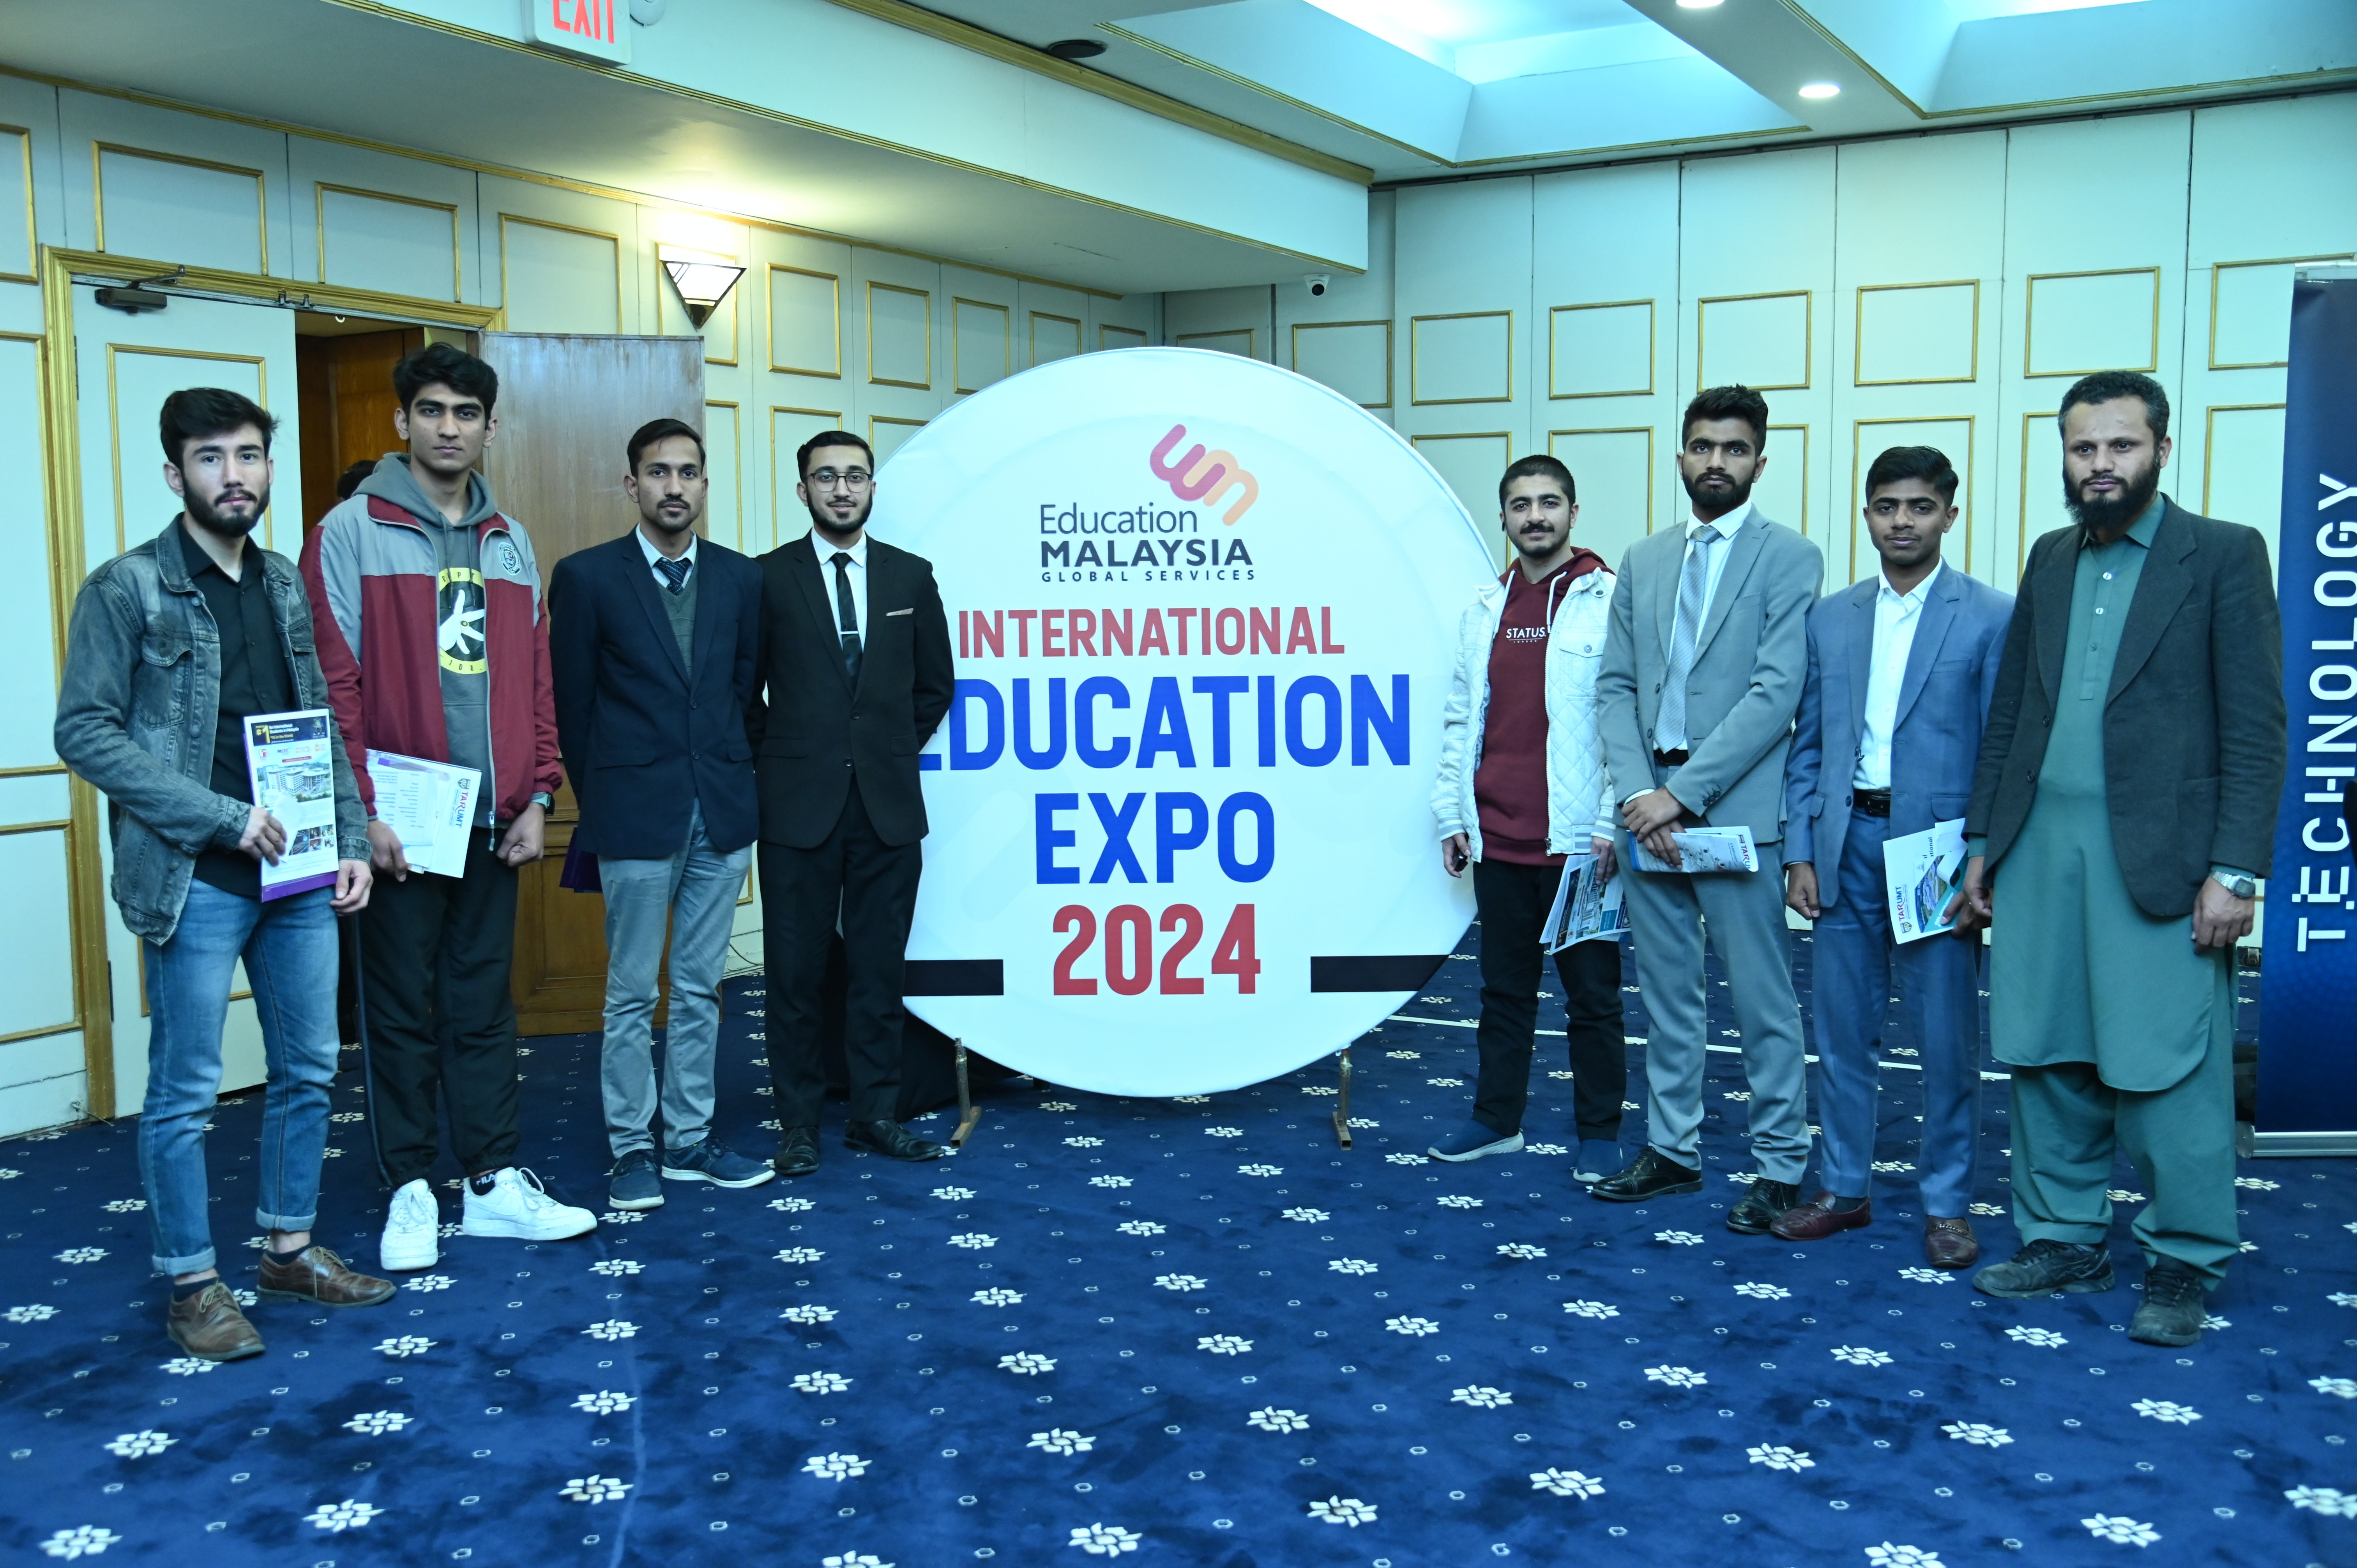 The group photo of students at the International Education Expo 2024